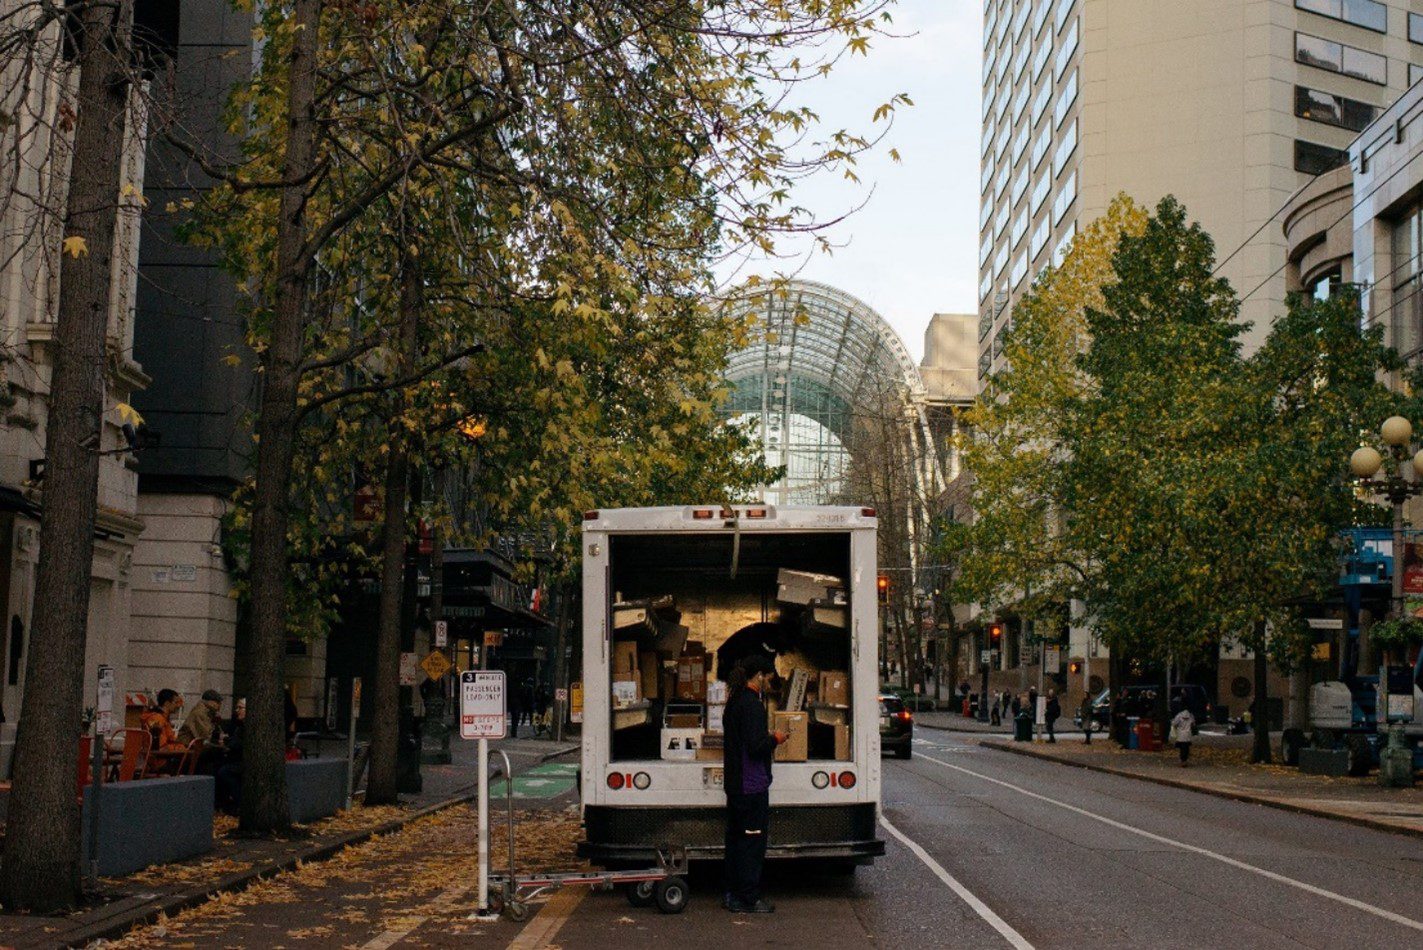 A worker delivers packages from a large white delivery truck. Trees and large buildings are in the background, as well as a street and sidewalk.